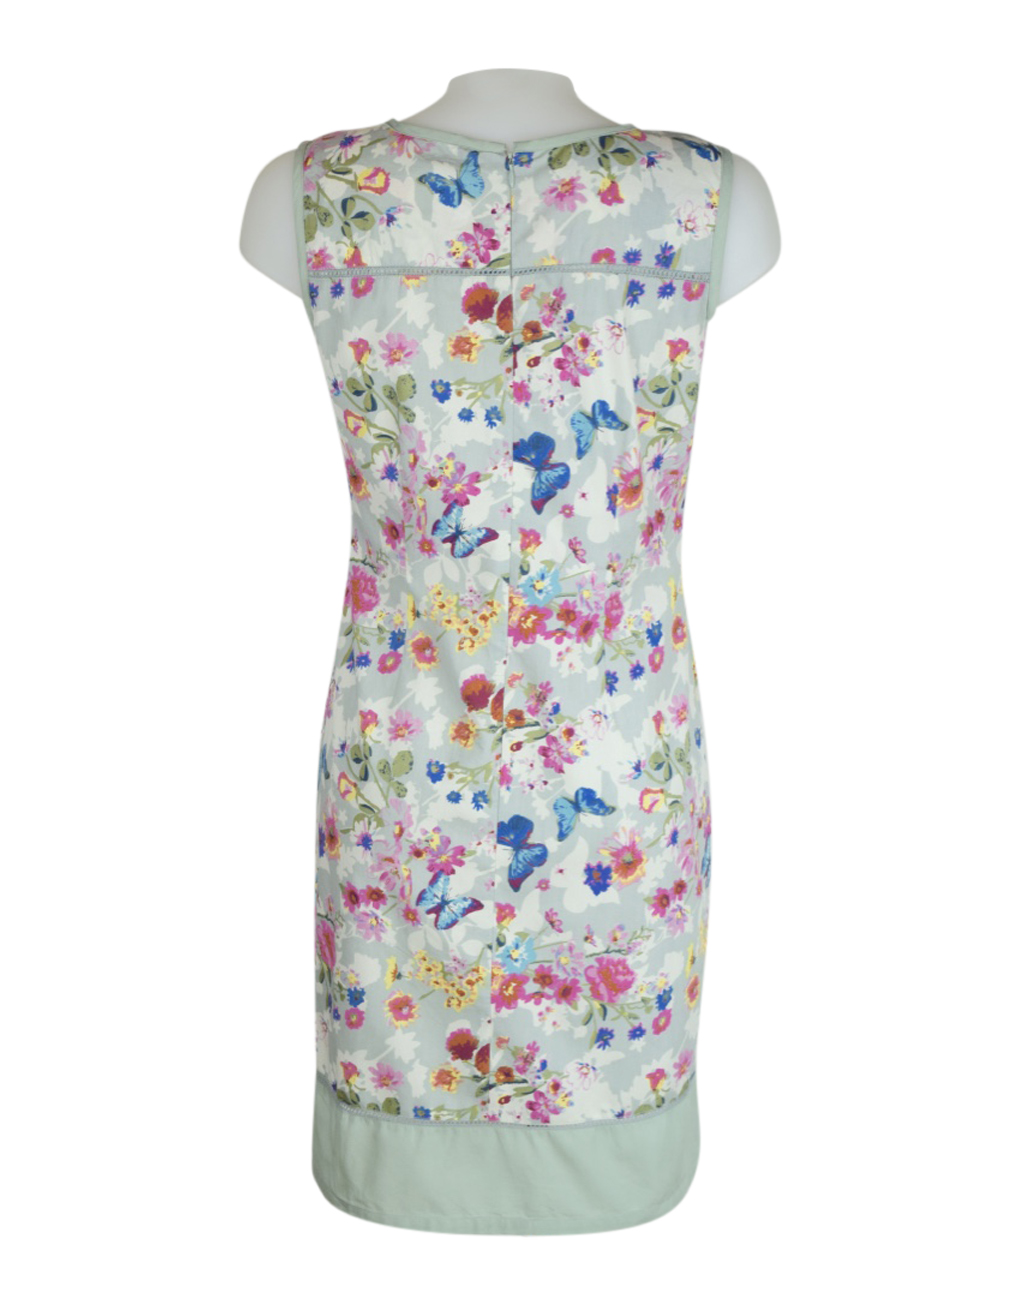 Alice Collins Harriet Dress Floral Butterfly1